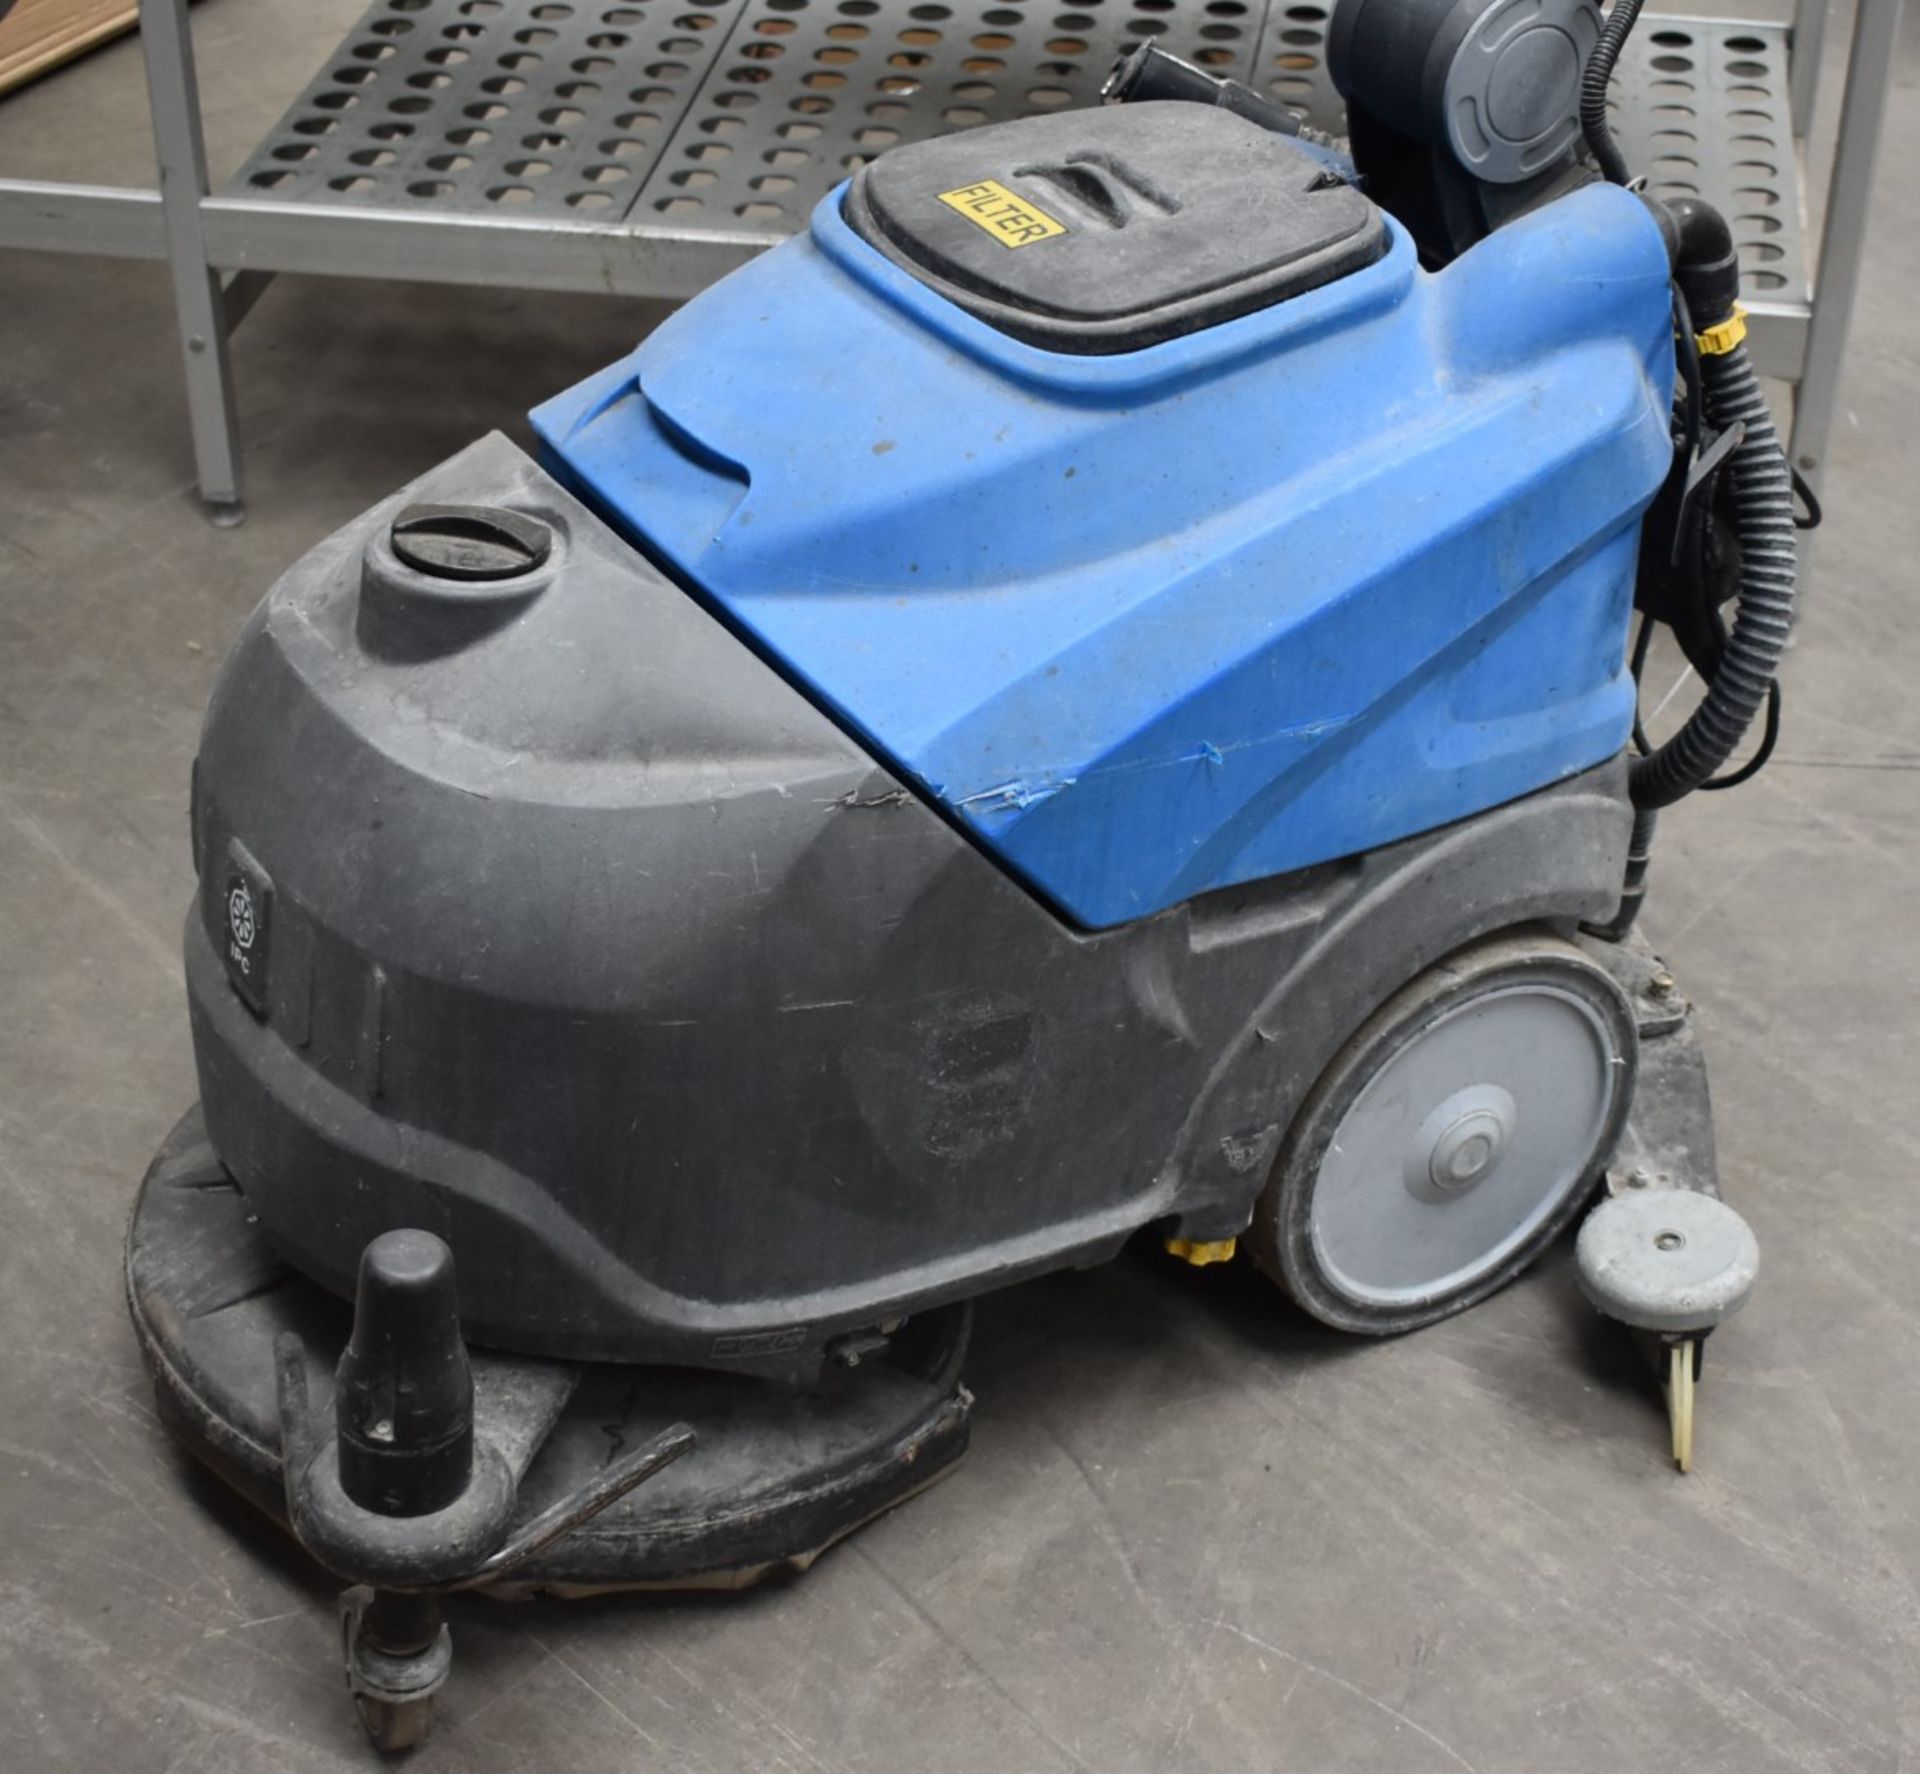 1 x ITC CT30 Walk Behind Battery Powered Floor Cleaner Scrubber/Dryer - Recently Removed From - Image 10 of 12